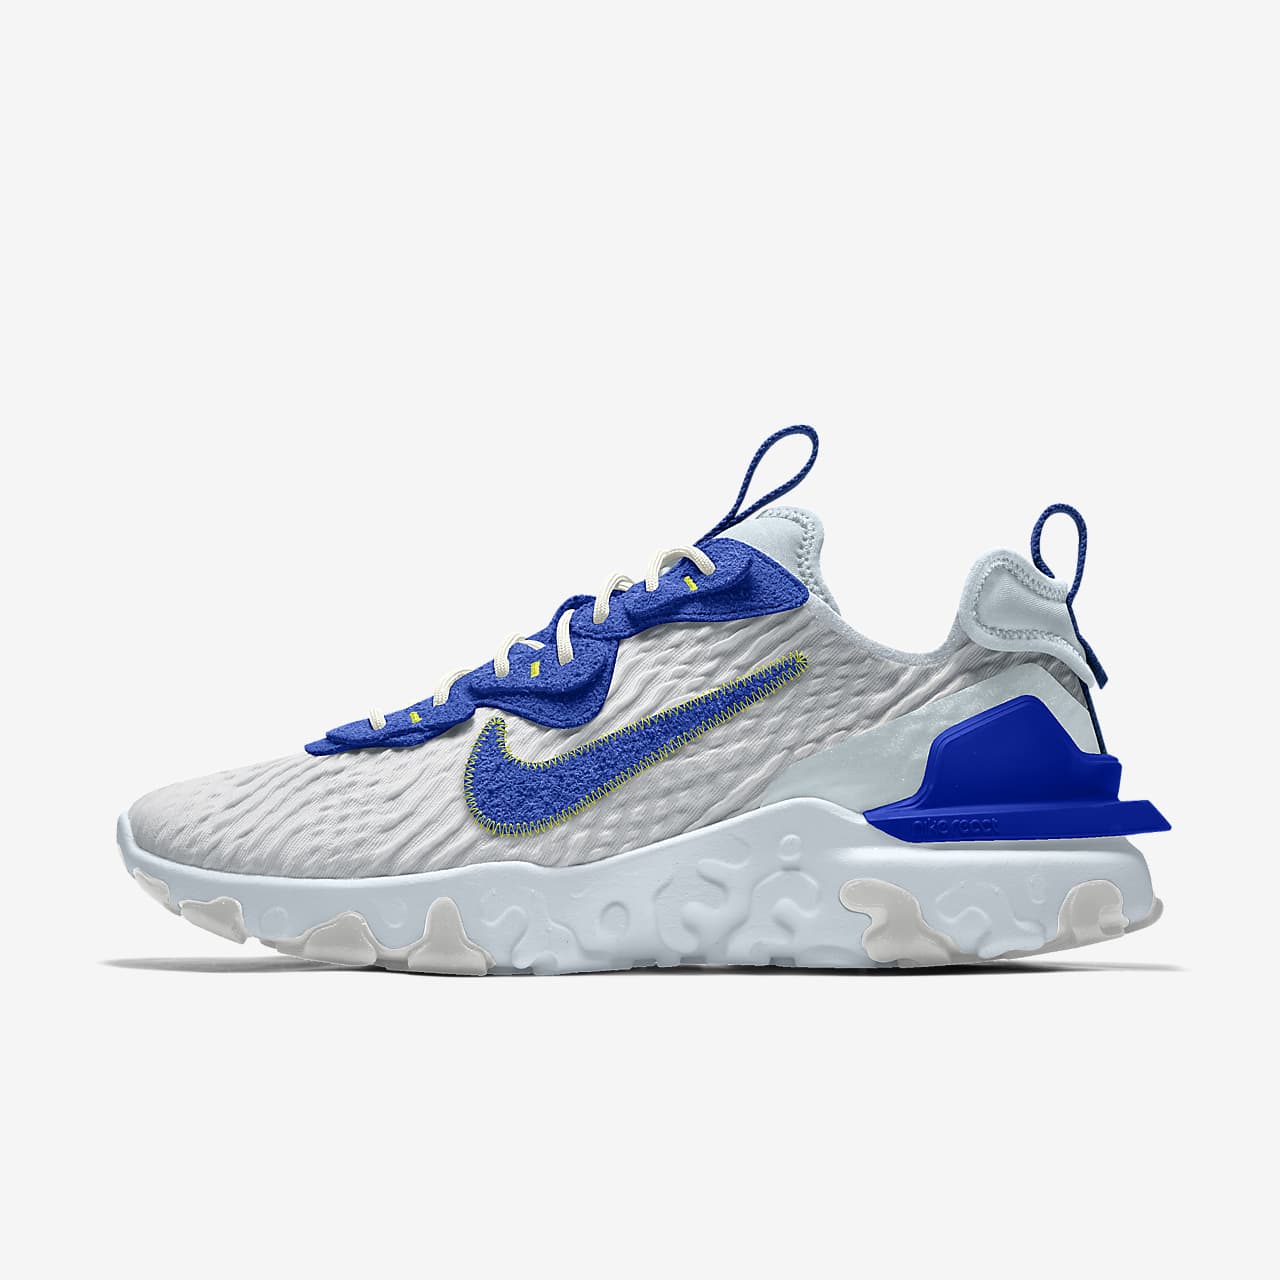 nike react vision femme blanche تارت لوتس